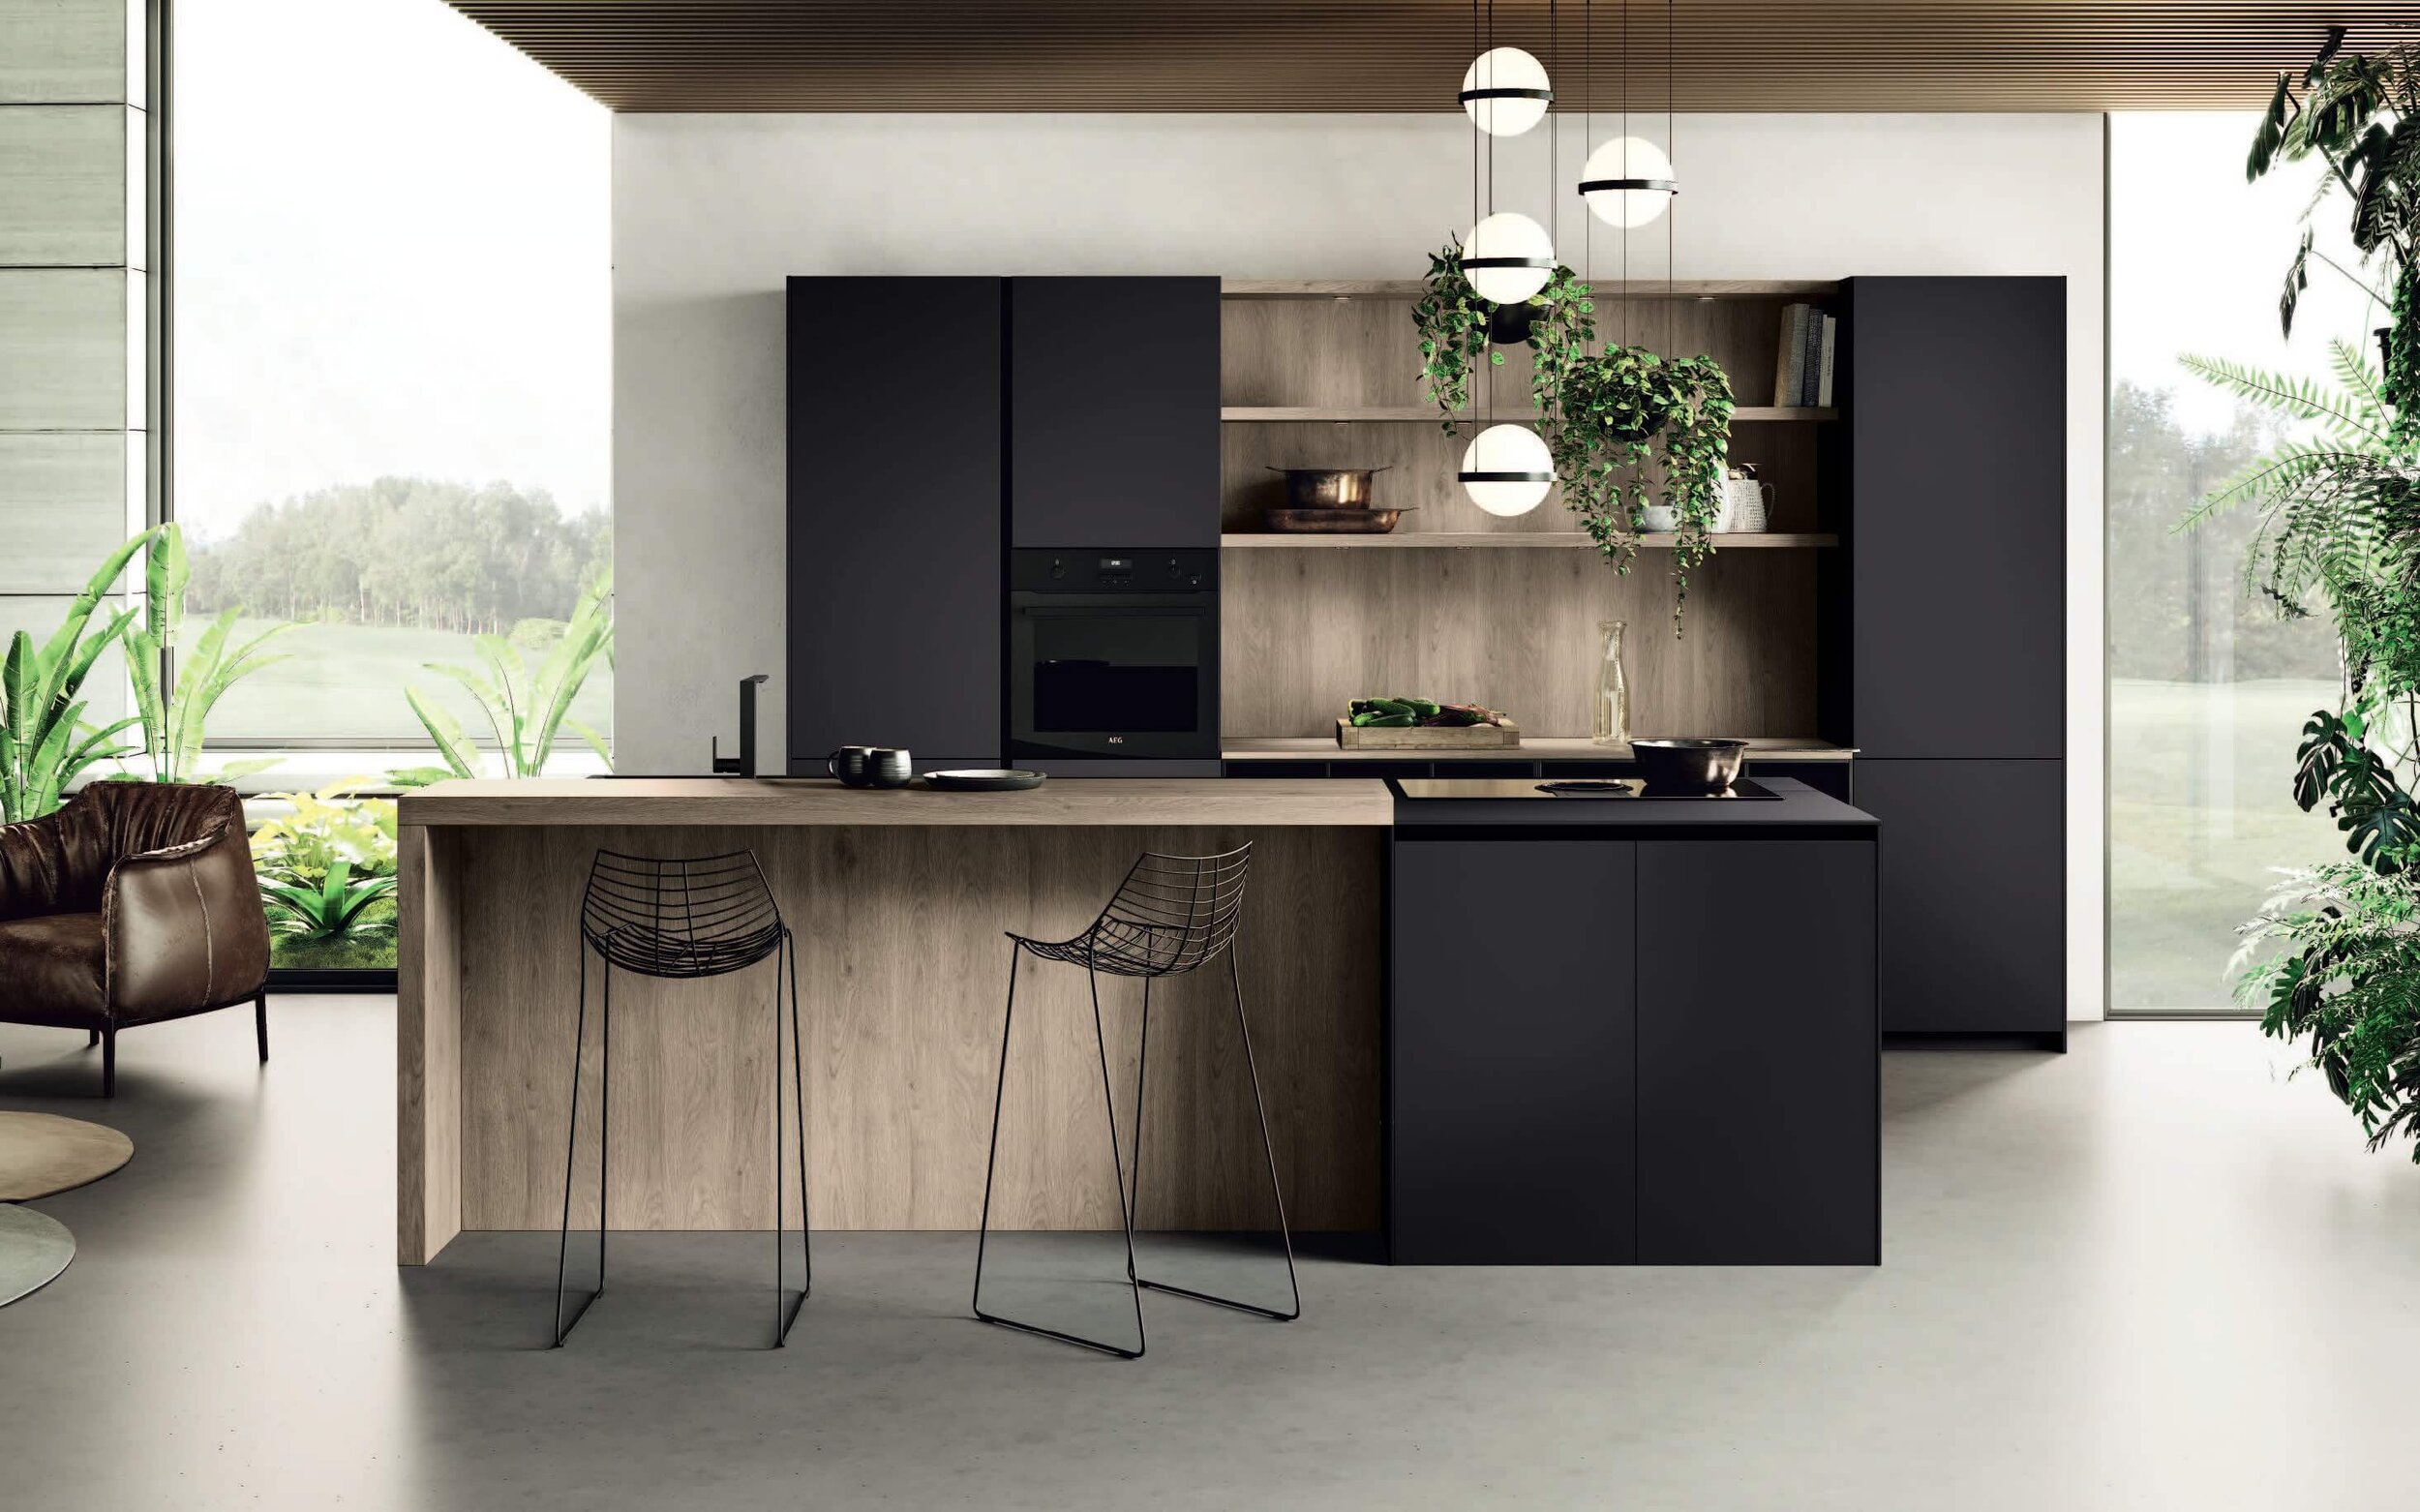   LUXURY GERMAN &amp; ITALIAN KITCHENS    From Design To Installation    Request a brochure   Arrange an appointment   